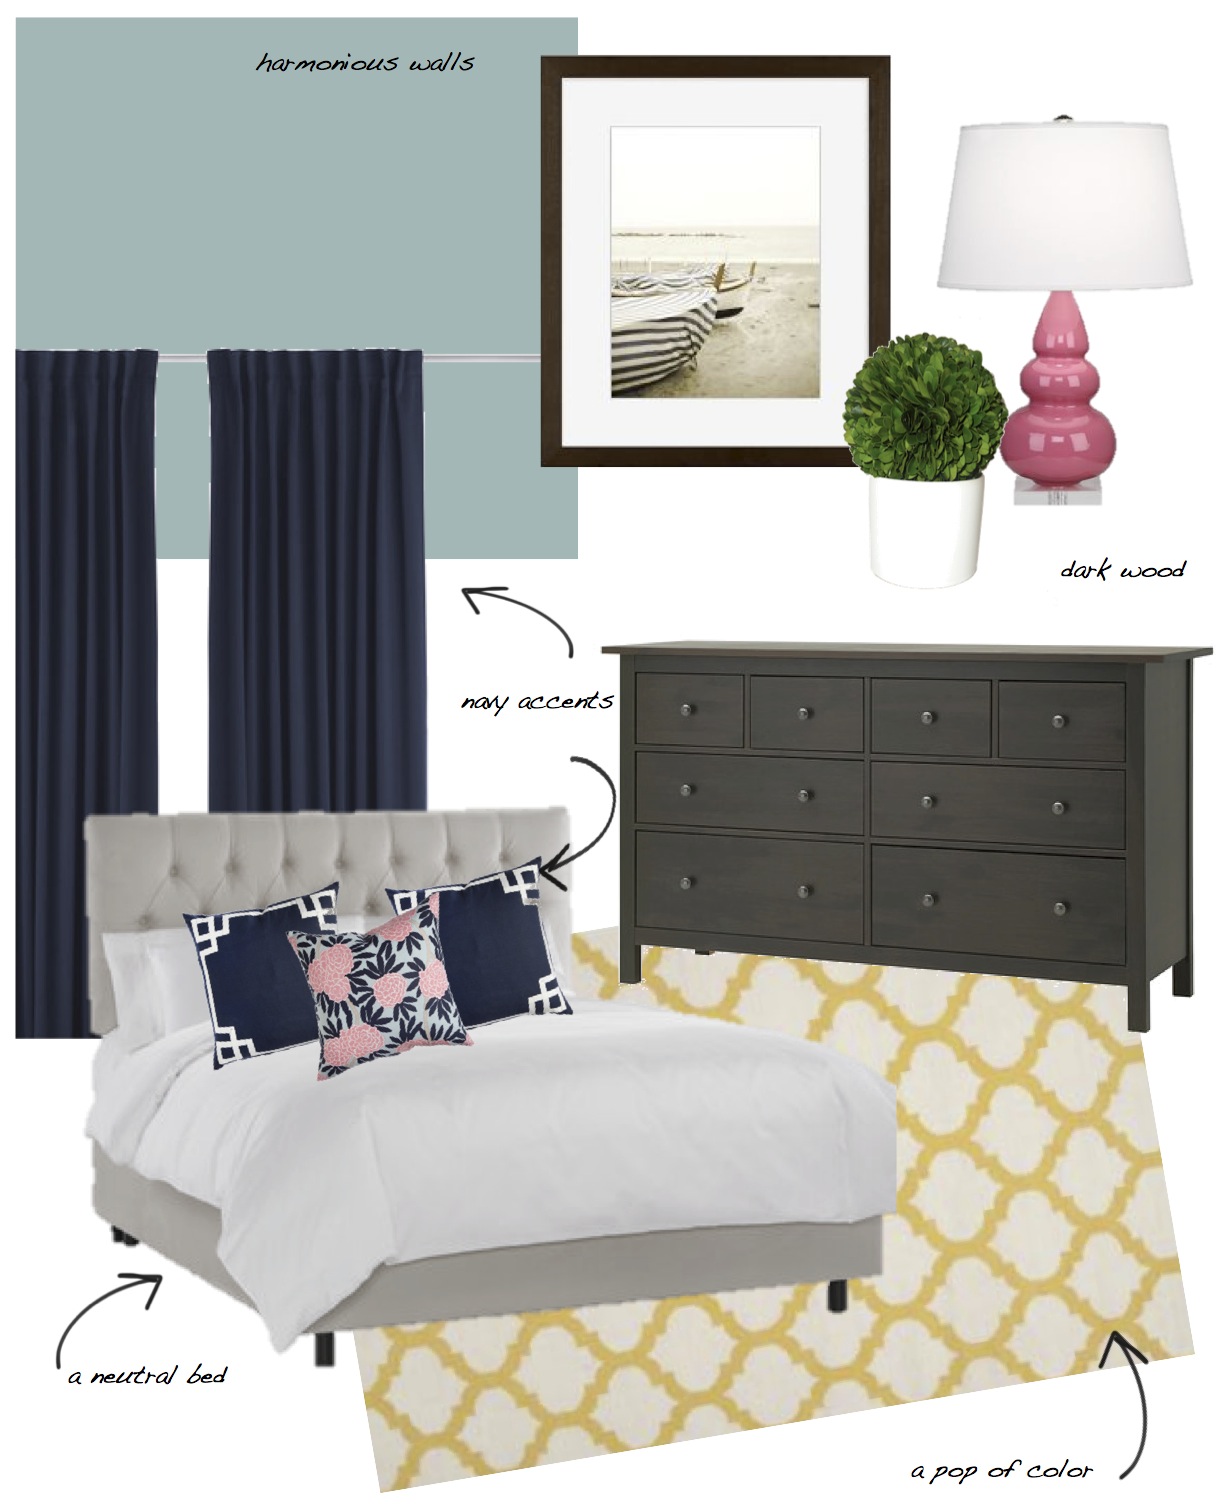 Inspiration Board: The Bedroom